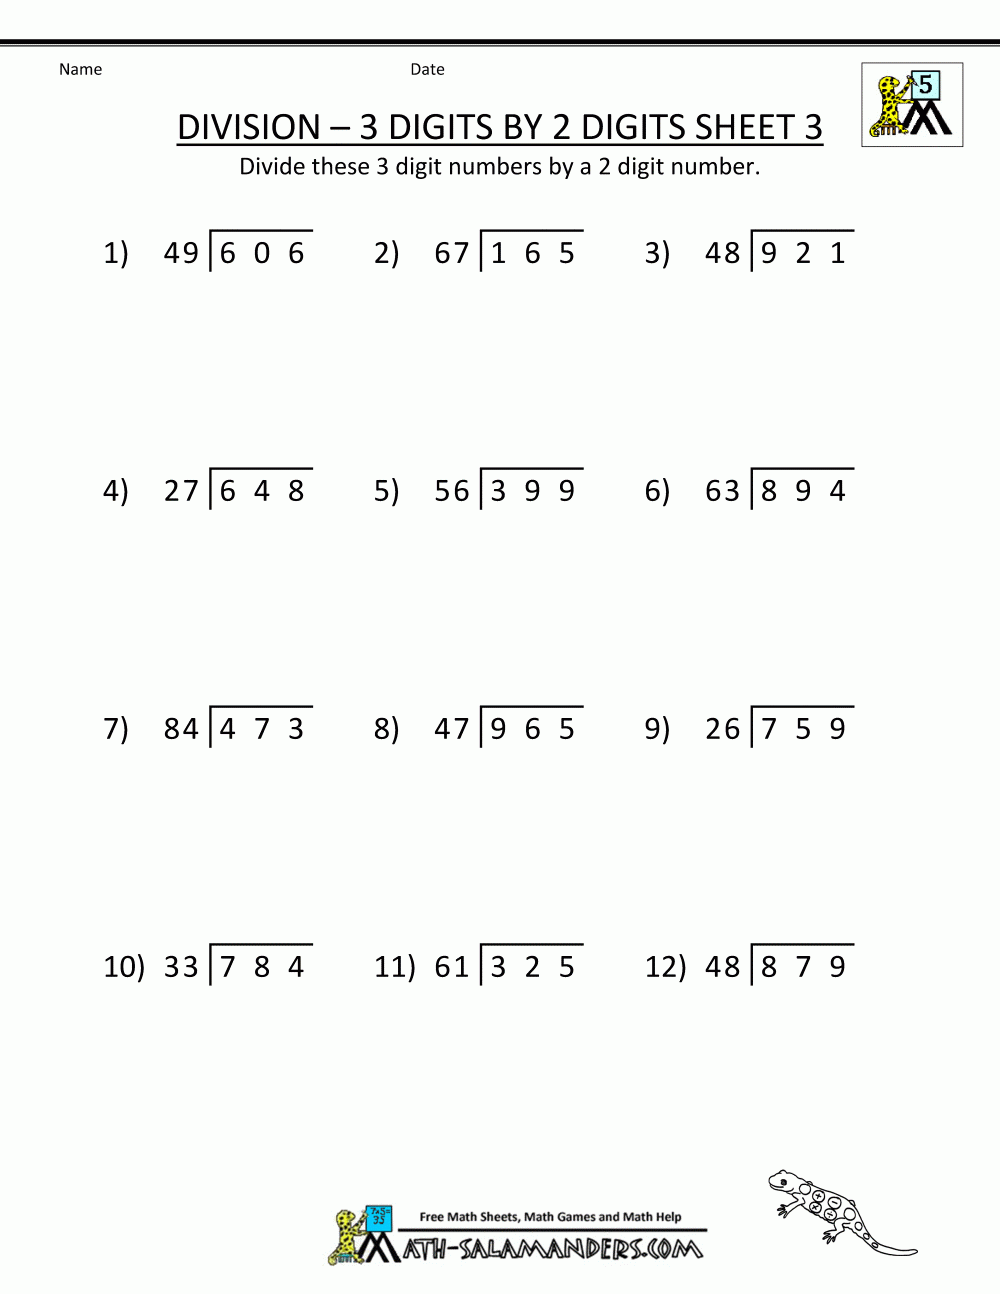 76 Free Worksheets For Long Division With 2 Digit Divisor For 5th 